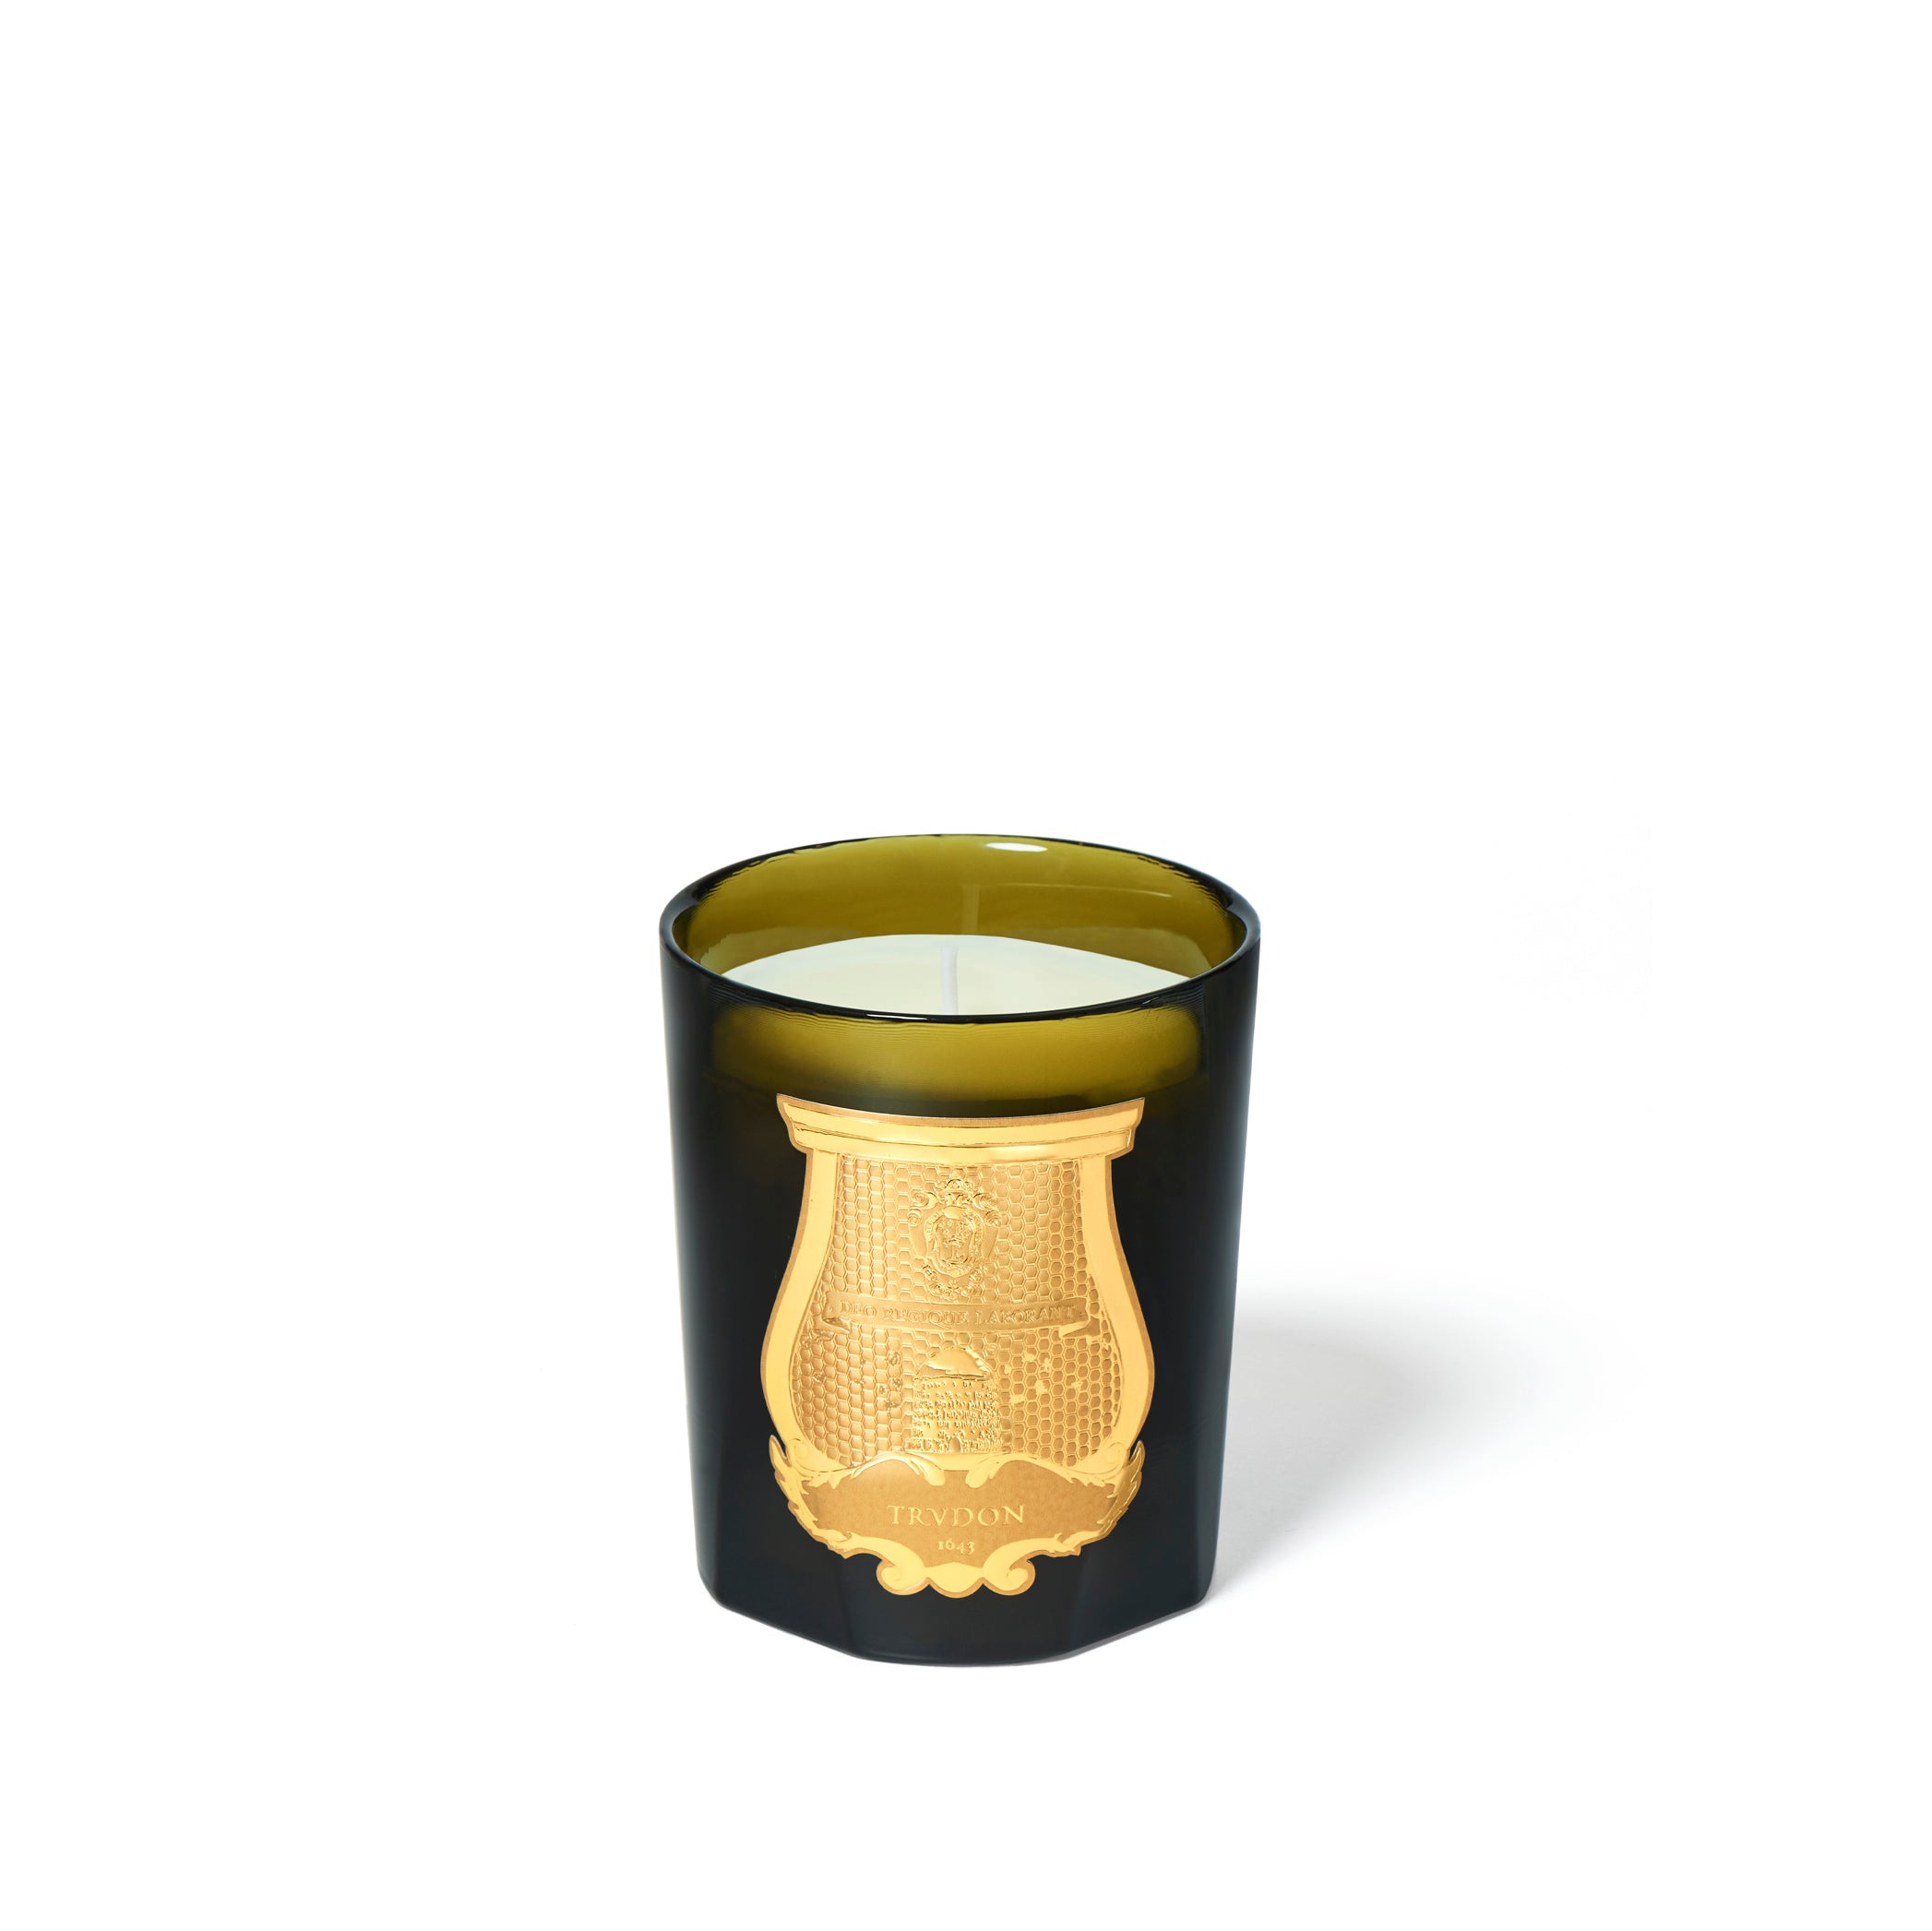 Classic Candle 'Abd El Kader' by Trudon, 270g